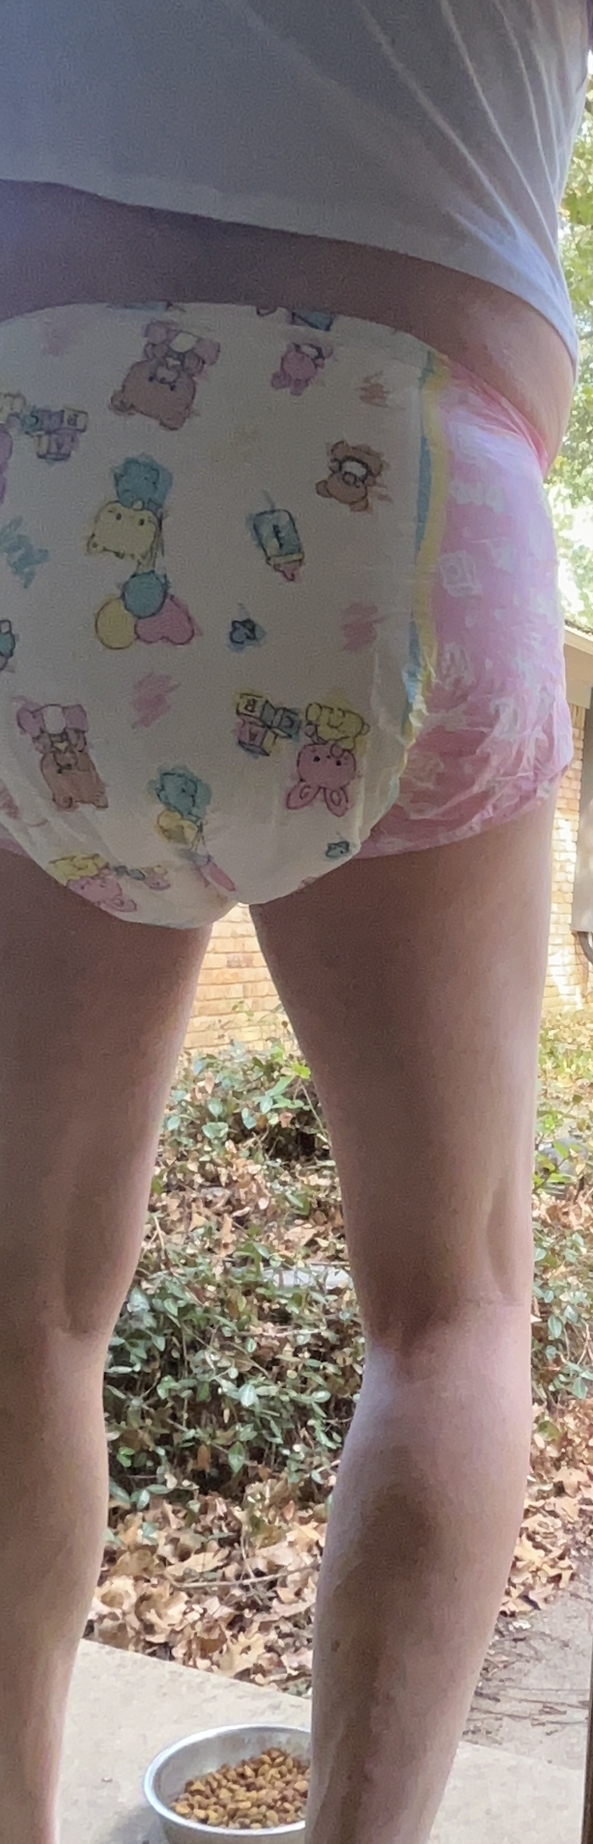 Wanting to play outside  - I wanted to go an play but I complained not like this in my shorts my diaper shows She said ok then no shorts it is , Thick diapers,defiant baby , Adult Babies,Feminization,Sissy Fashion,Bad Boy To Good Girl